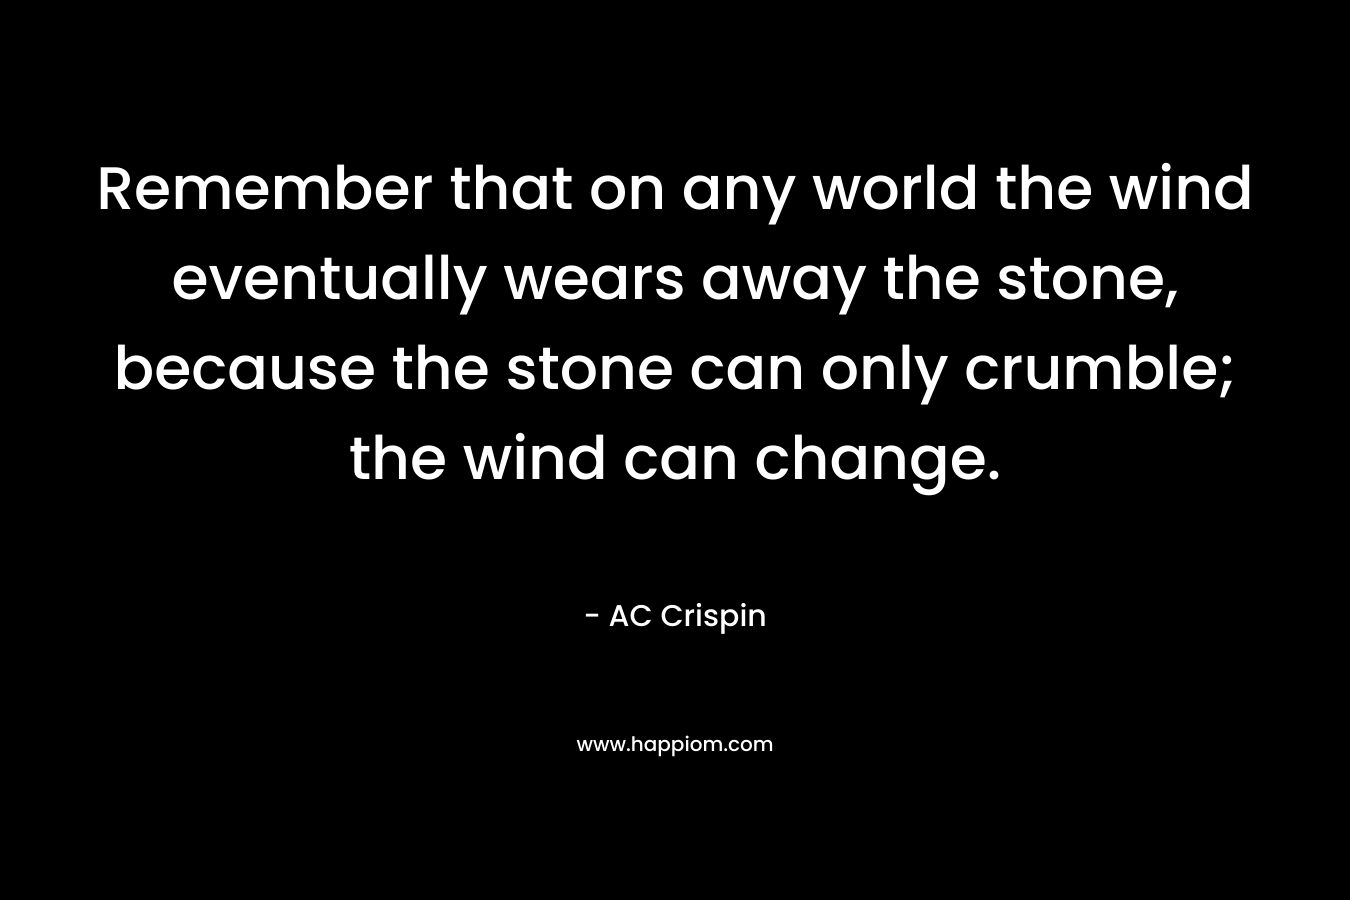 Remember that on any world the wind eventually wears away the stone, because the stone can only crumble; the wind can change.